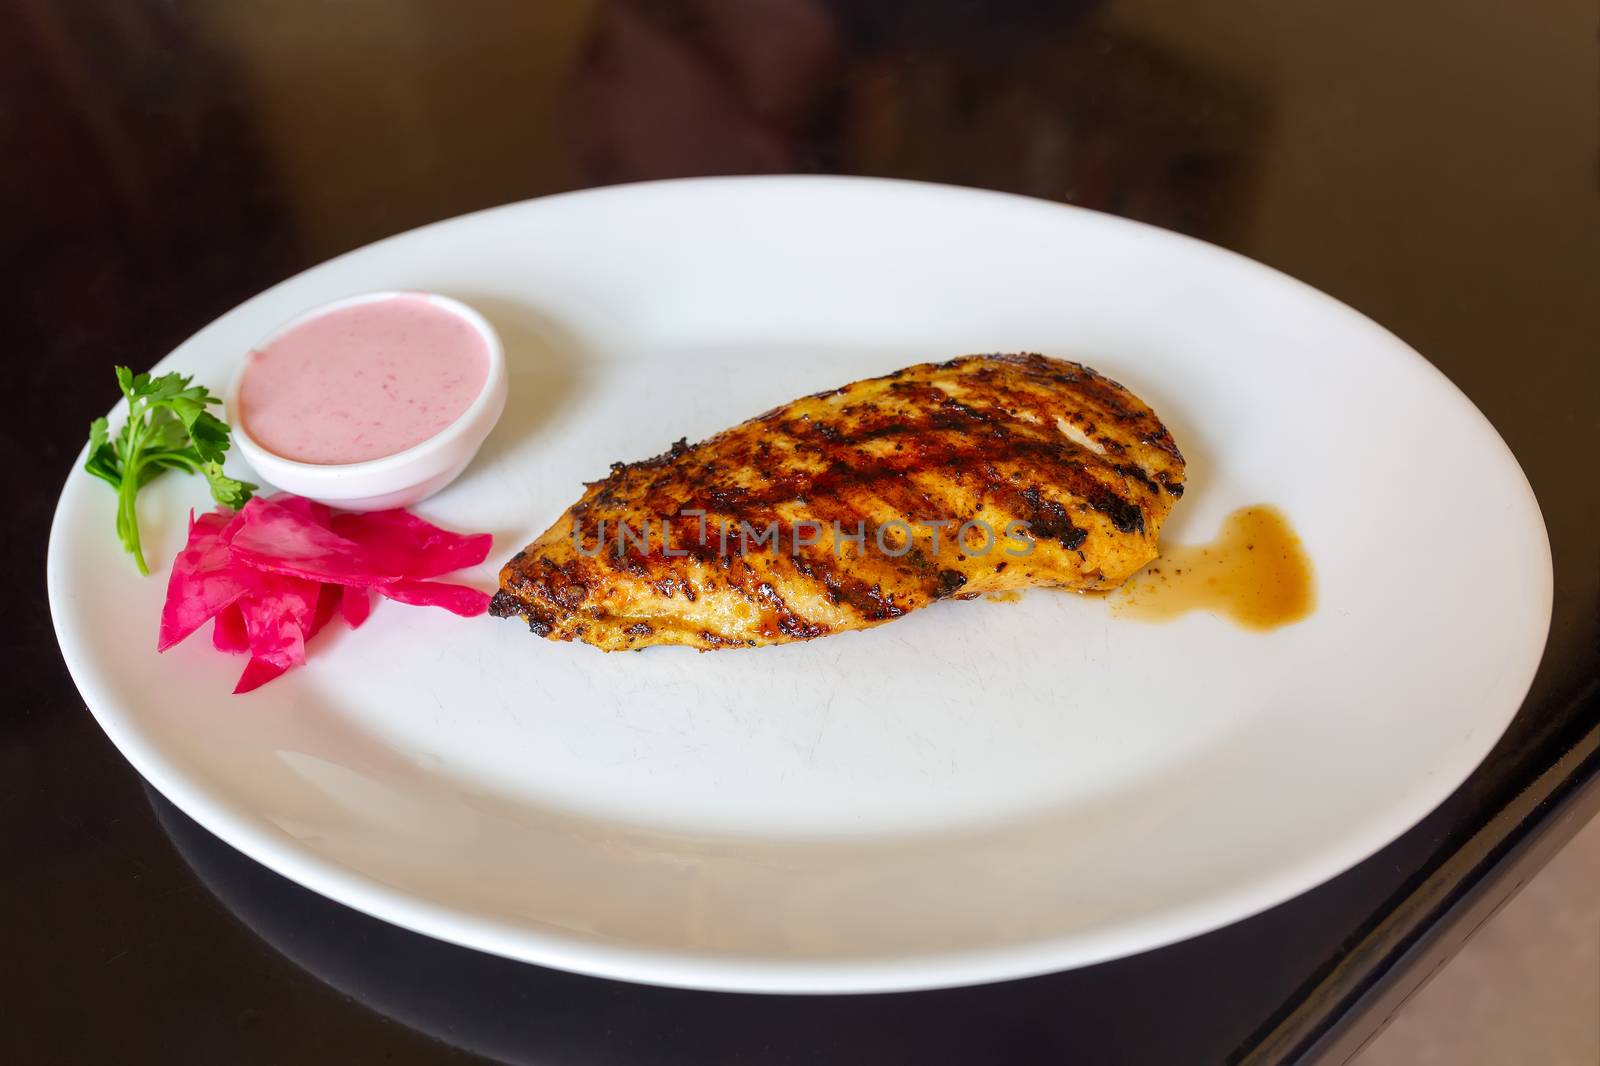 Appetizing grilled chicken breast on a white plate with pink sauce, pickled ginger and parsley. Nearby lies a fork and a knife in a napkin.